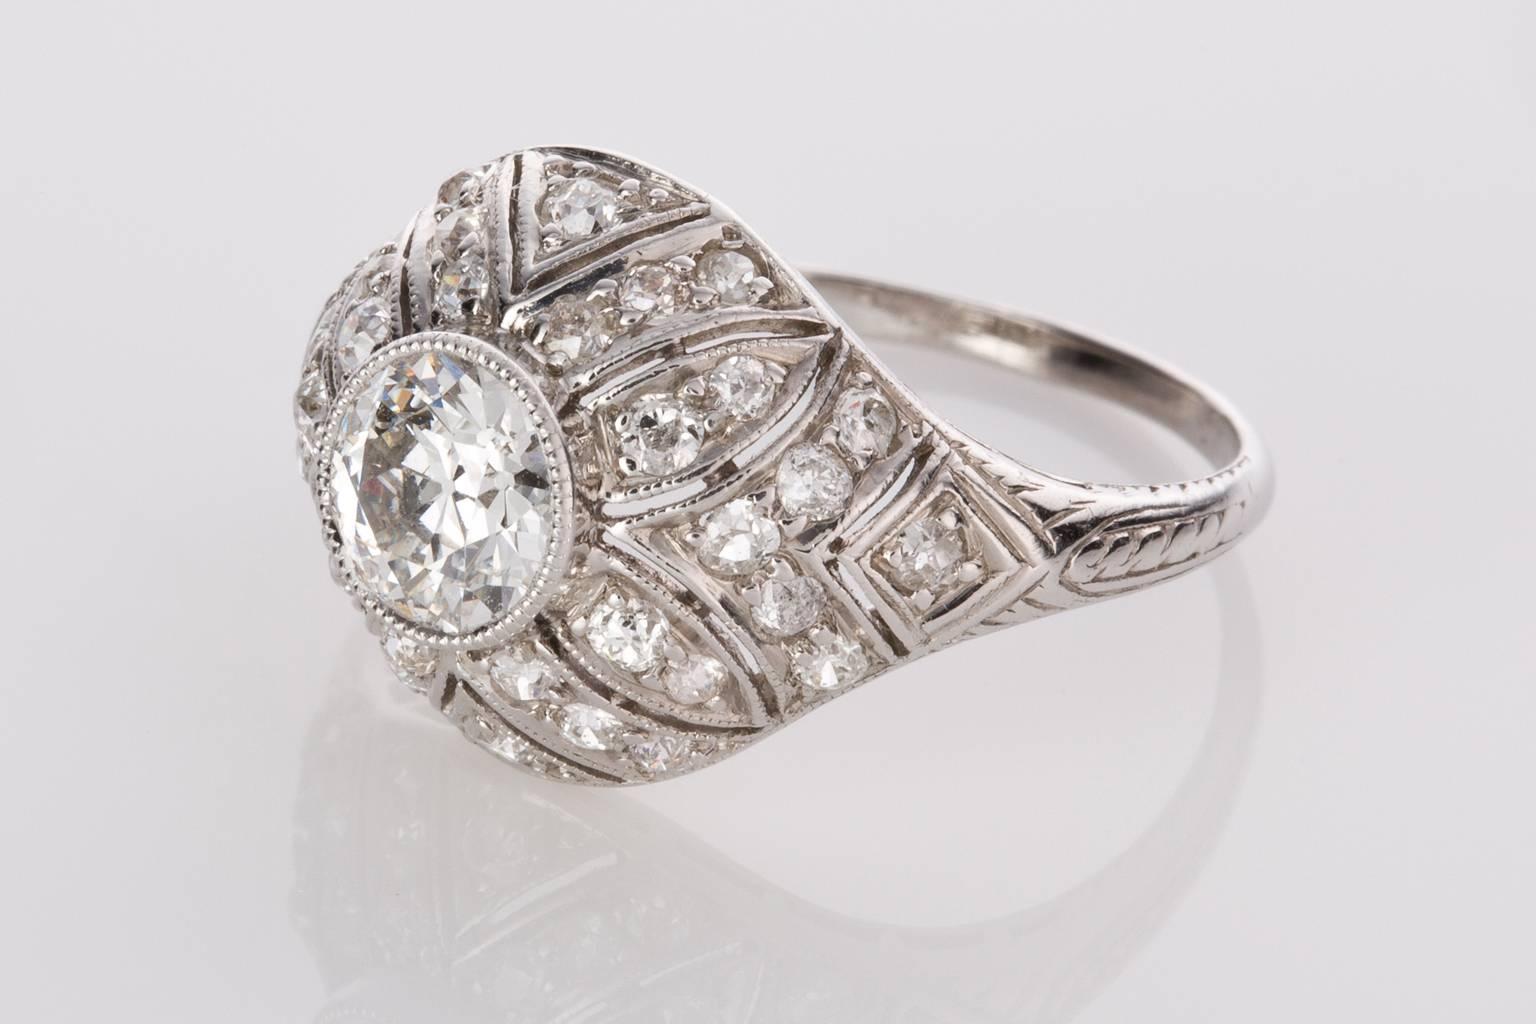 This ring is a total knockout! A fabulous original Edwardian filigree ring set with a central old European cut diamond weighing 0.81cts H colour, SI1 clarity,  accented with intricate filigree detailing working outwards in a floral pattern